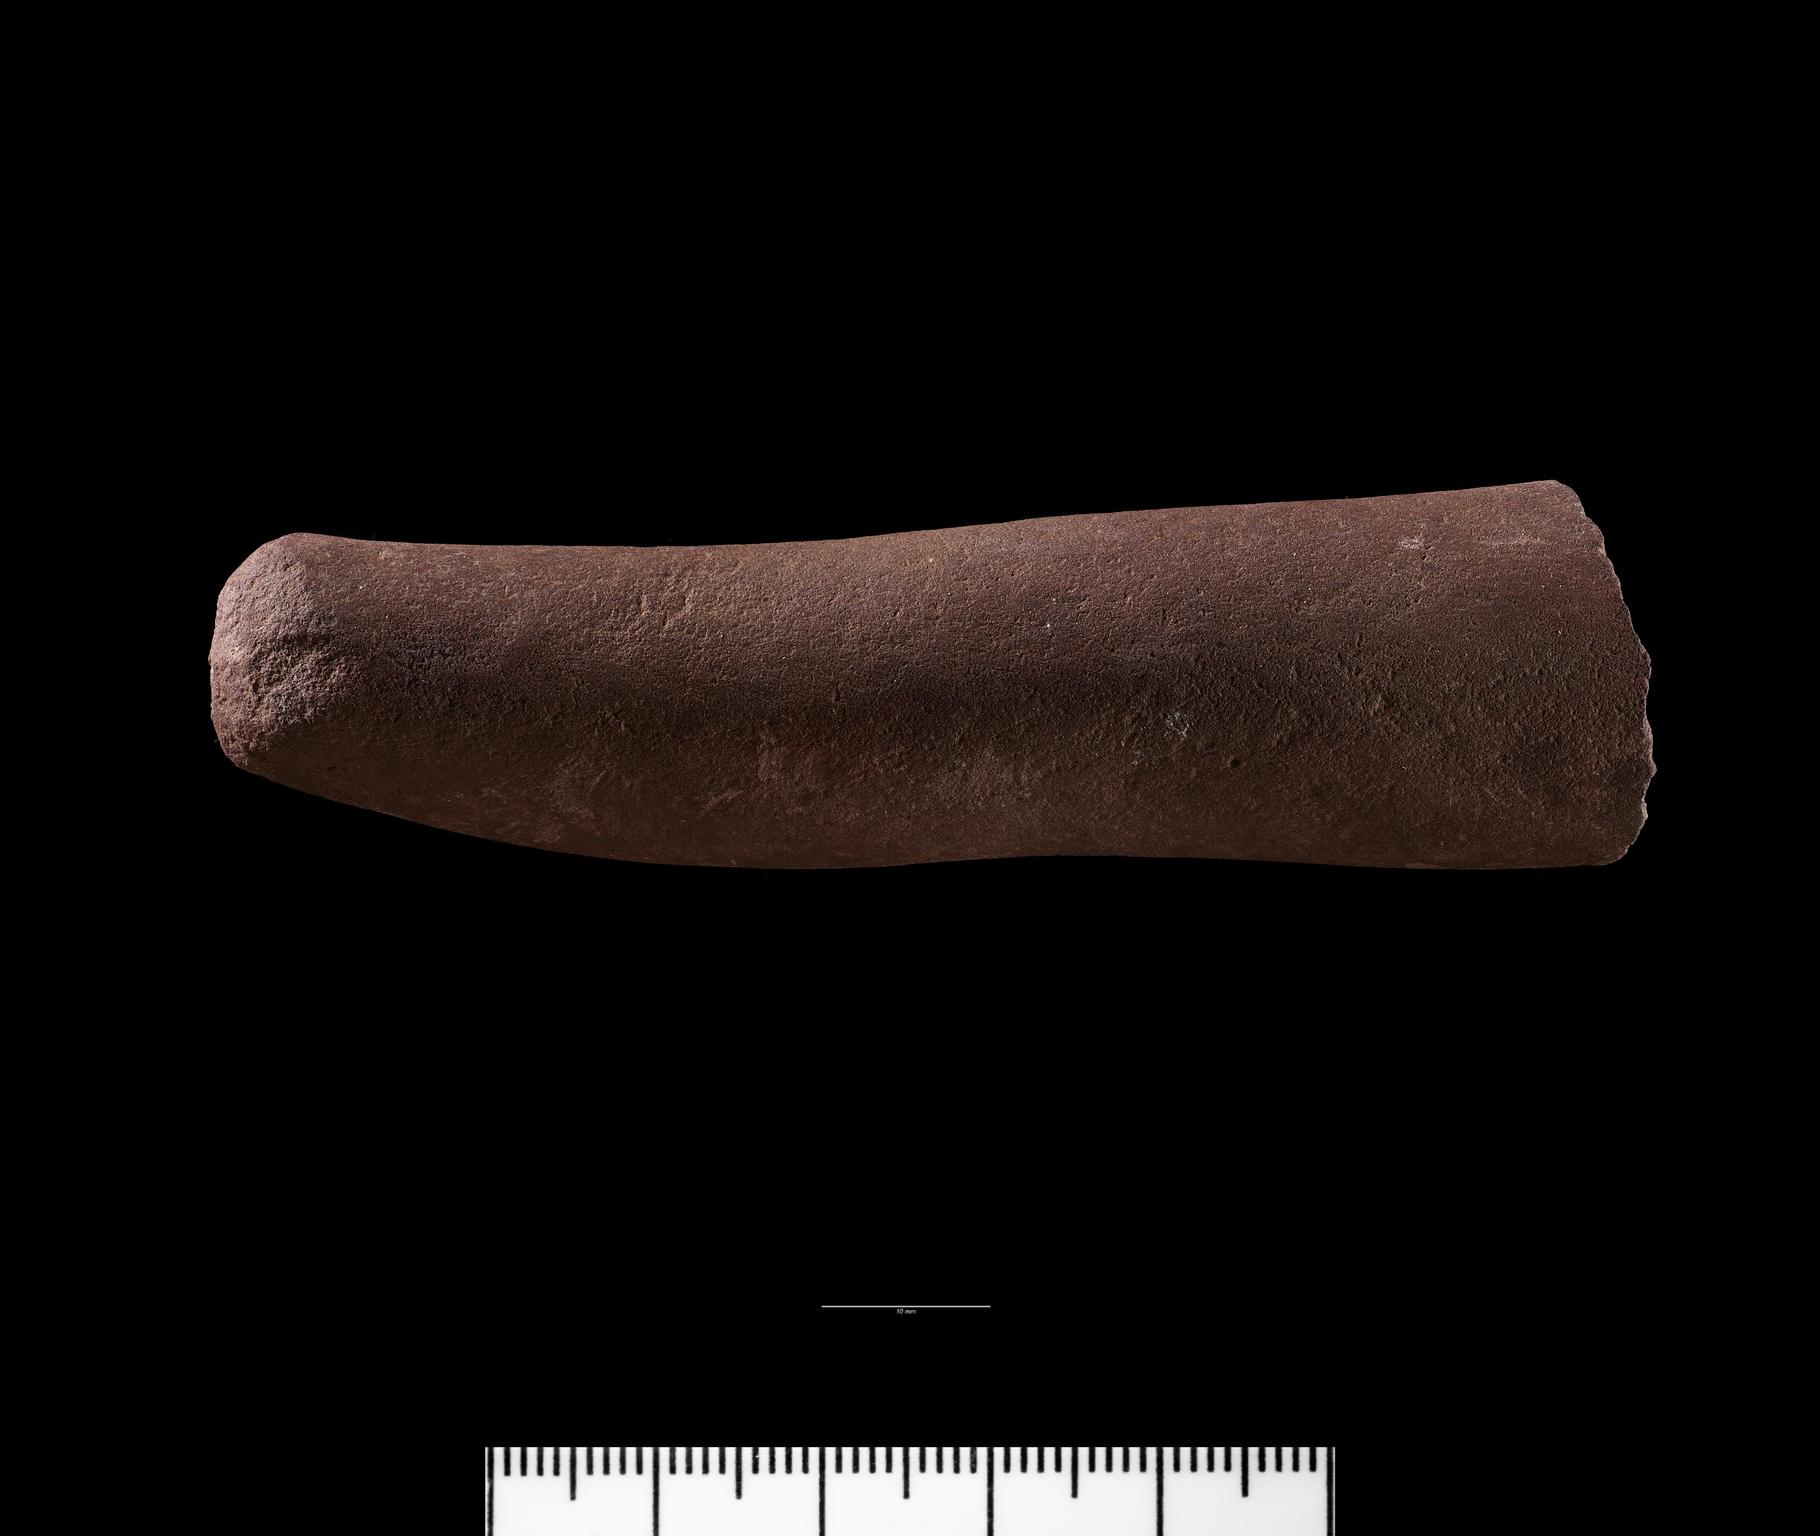 Late Mesolithic bevelled pebble